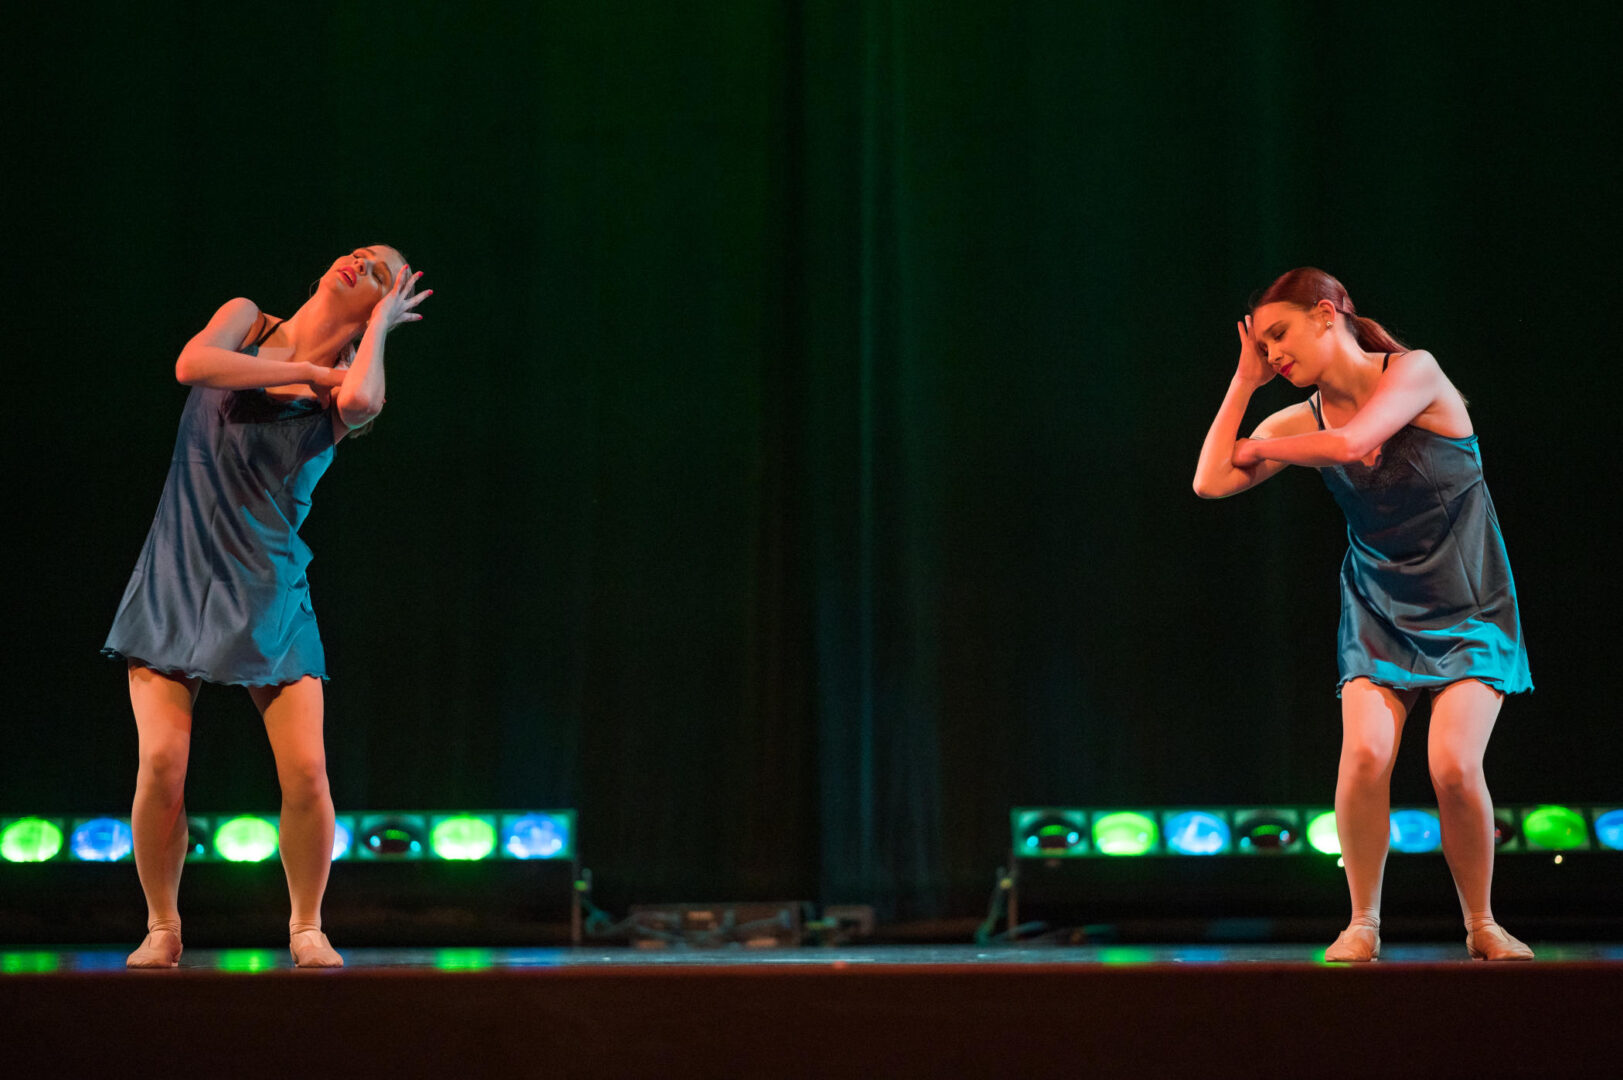 Two female students perform an artistic dance on a stage.